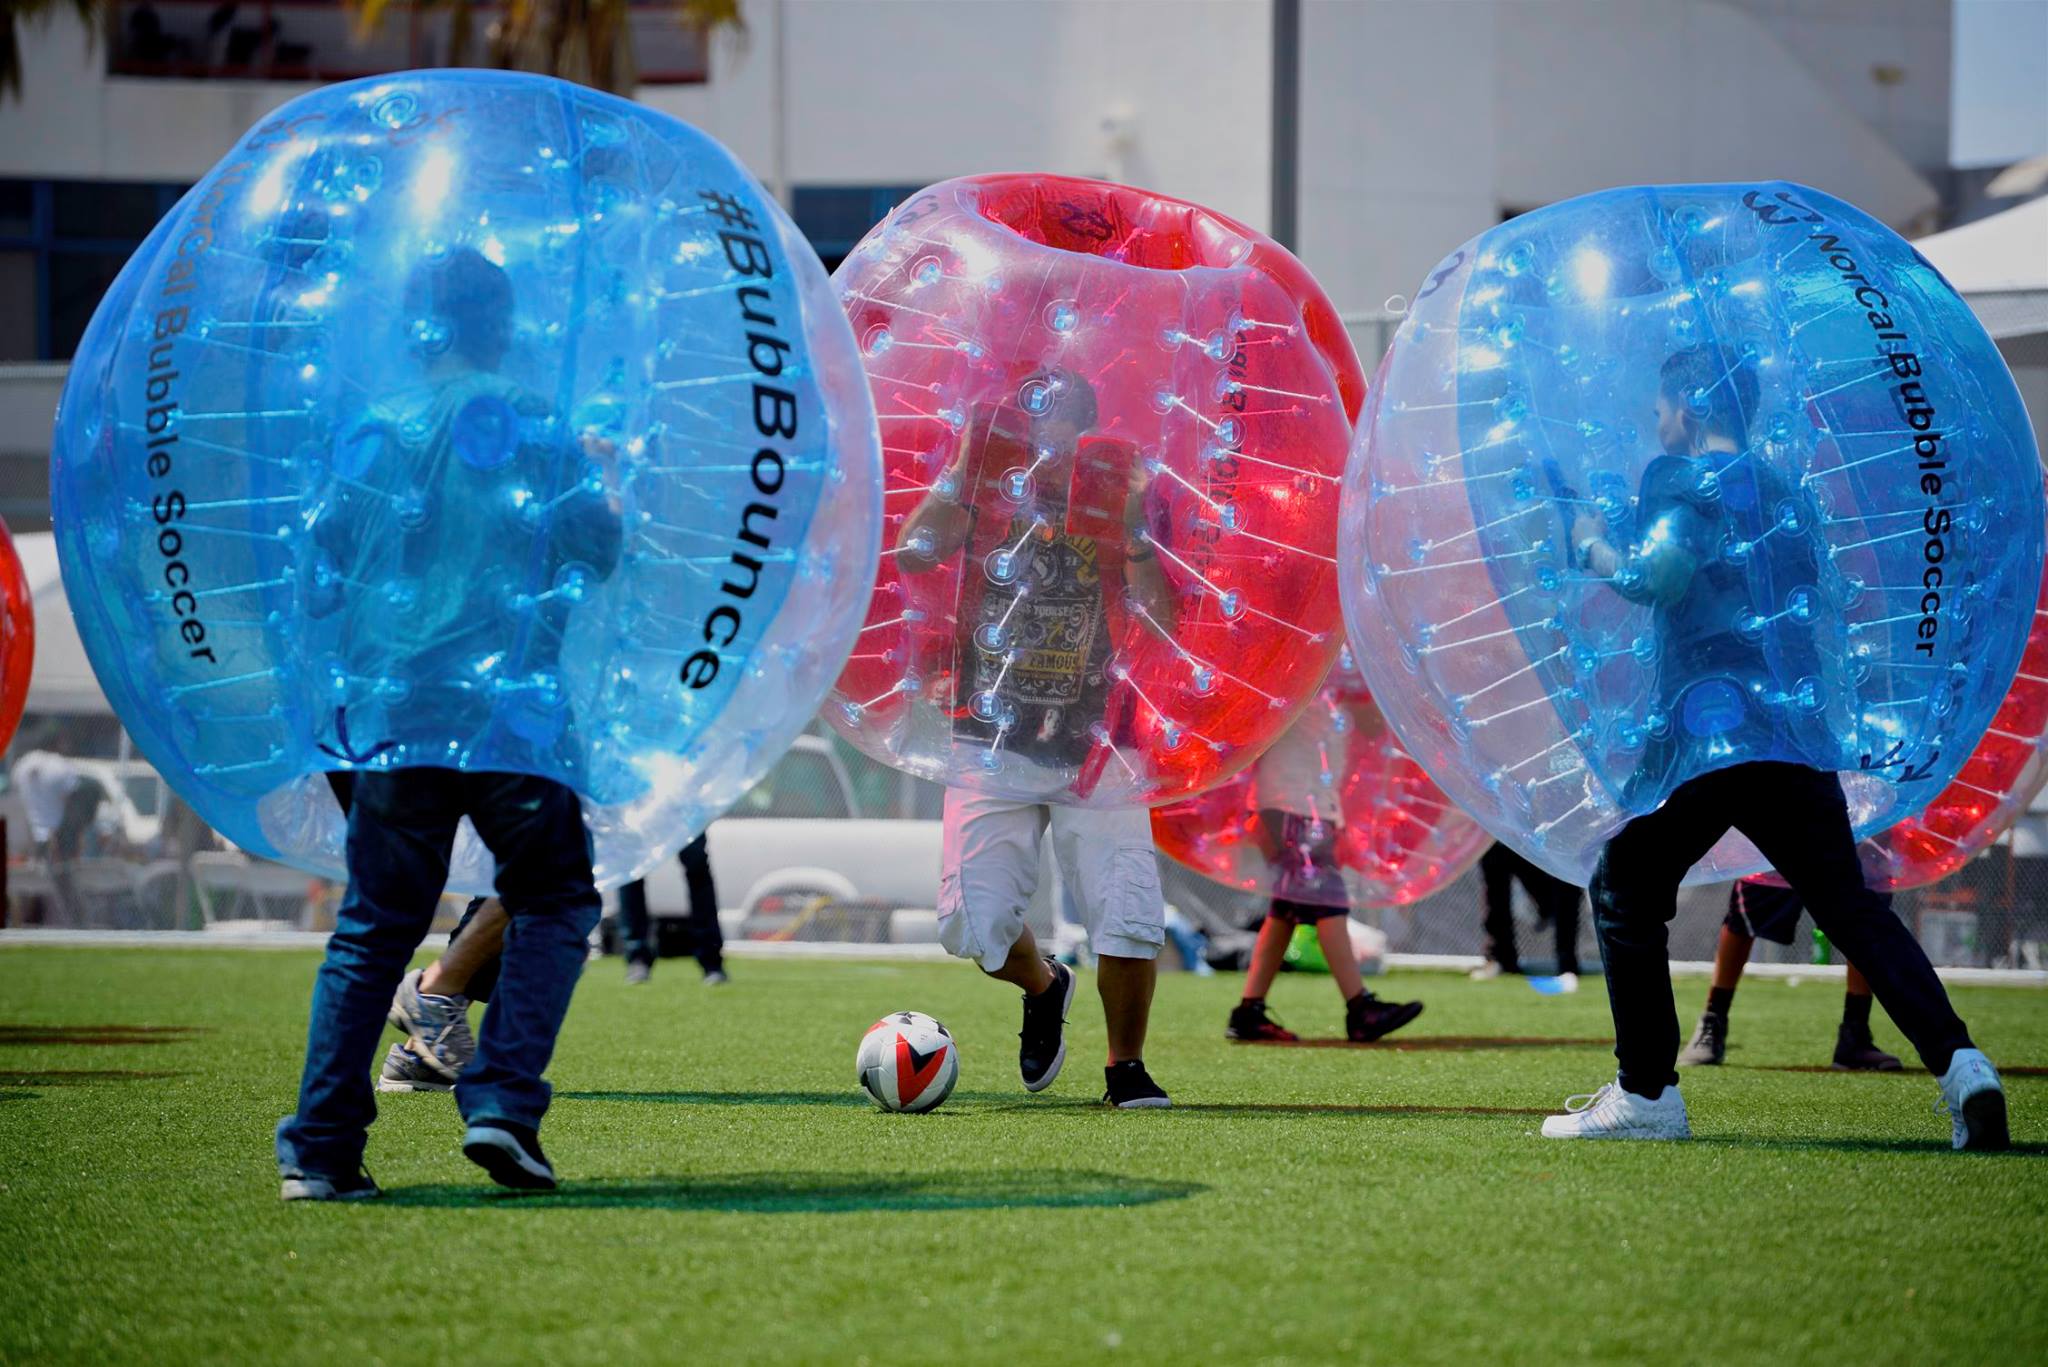 SF Events: Bubble soccer with SF Deltas